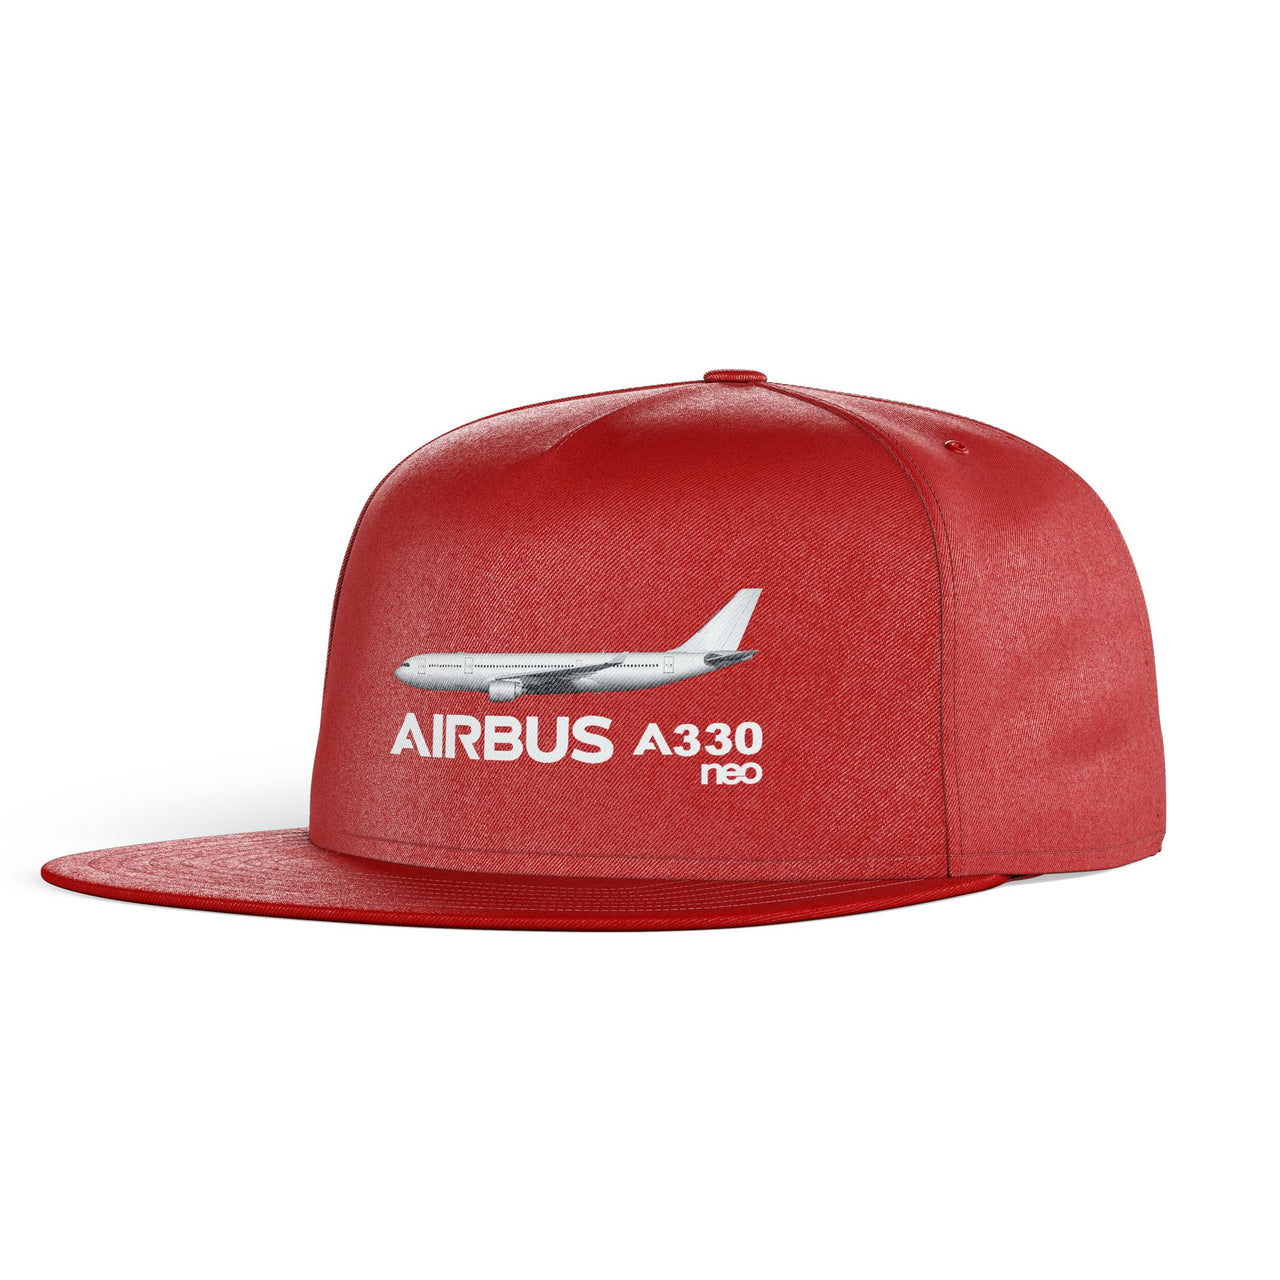 The Airbus A330neo Designed Snapback Caps & Hats